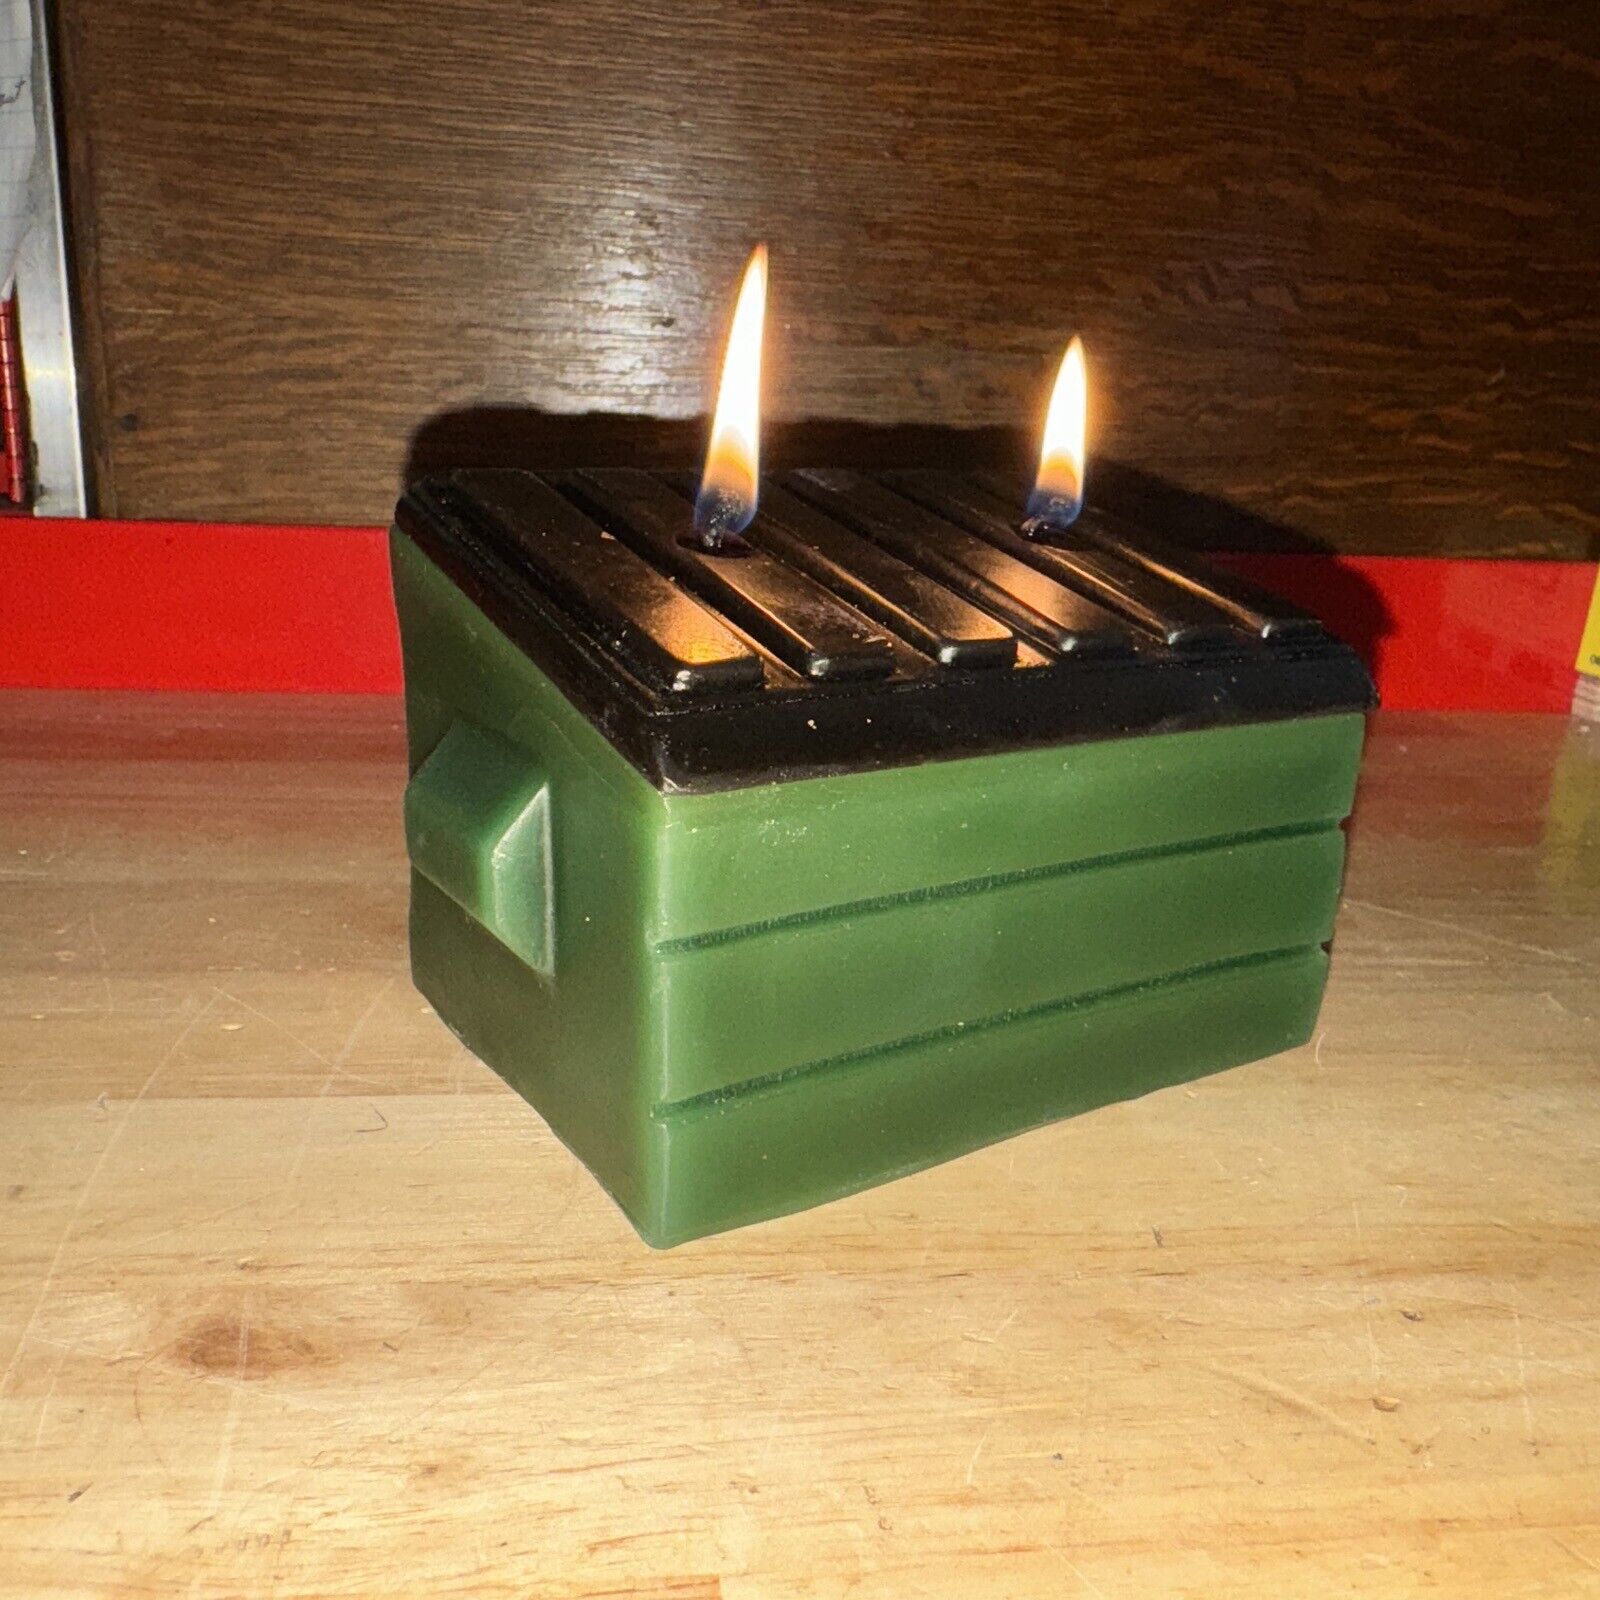 Candle Dumpster Fire Paperweight Funny Office Work Desk 1+ LBS Decor Prank 2023